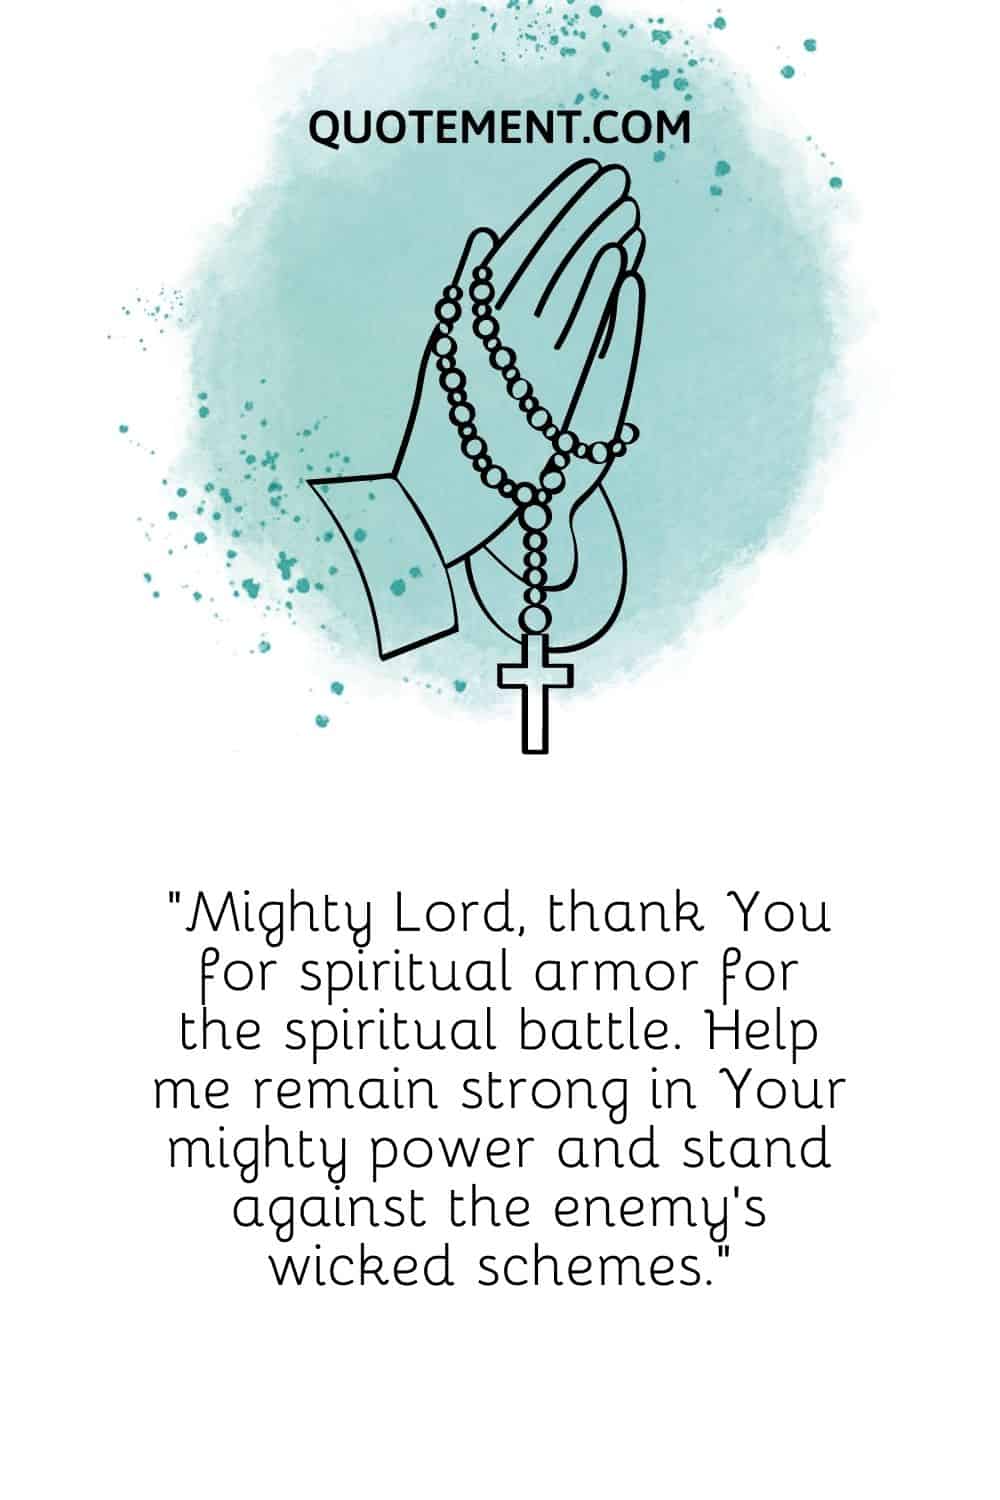 Mighty Lord, thank You for spiritual armor for the spiritual battle